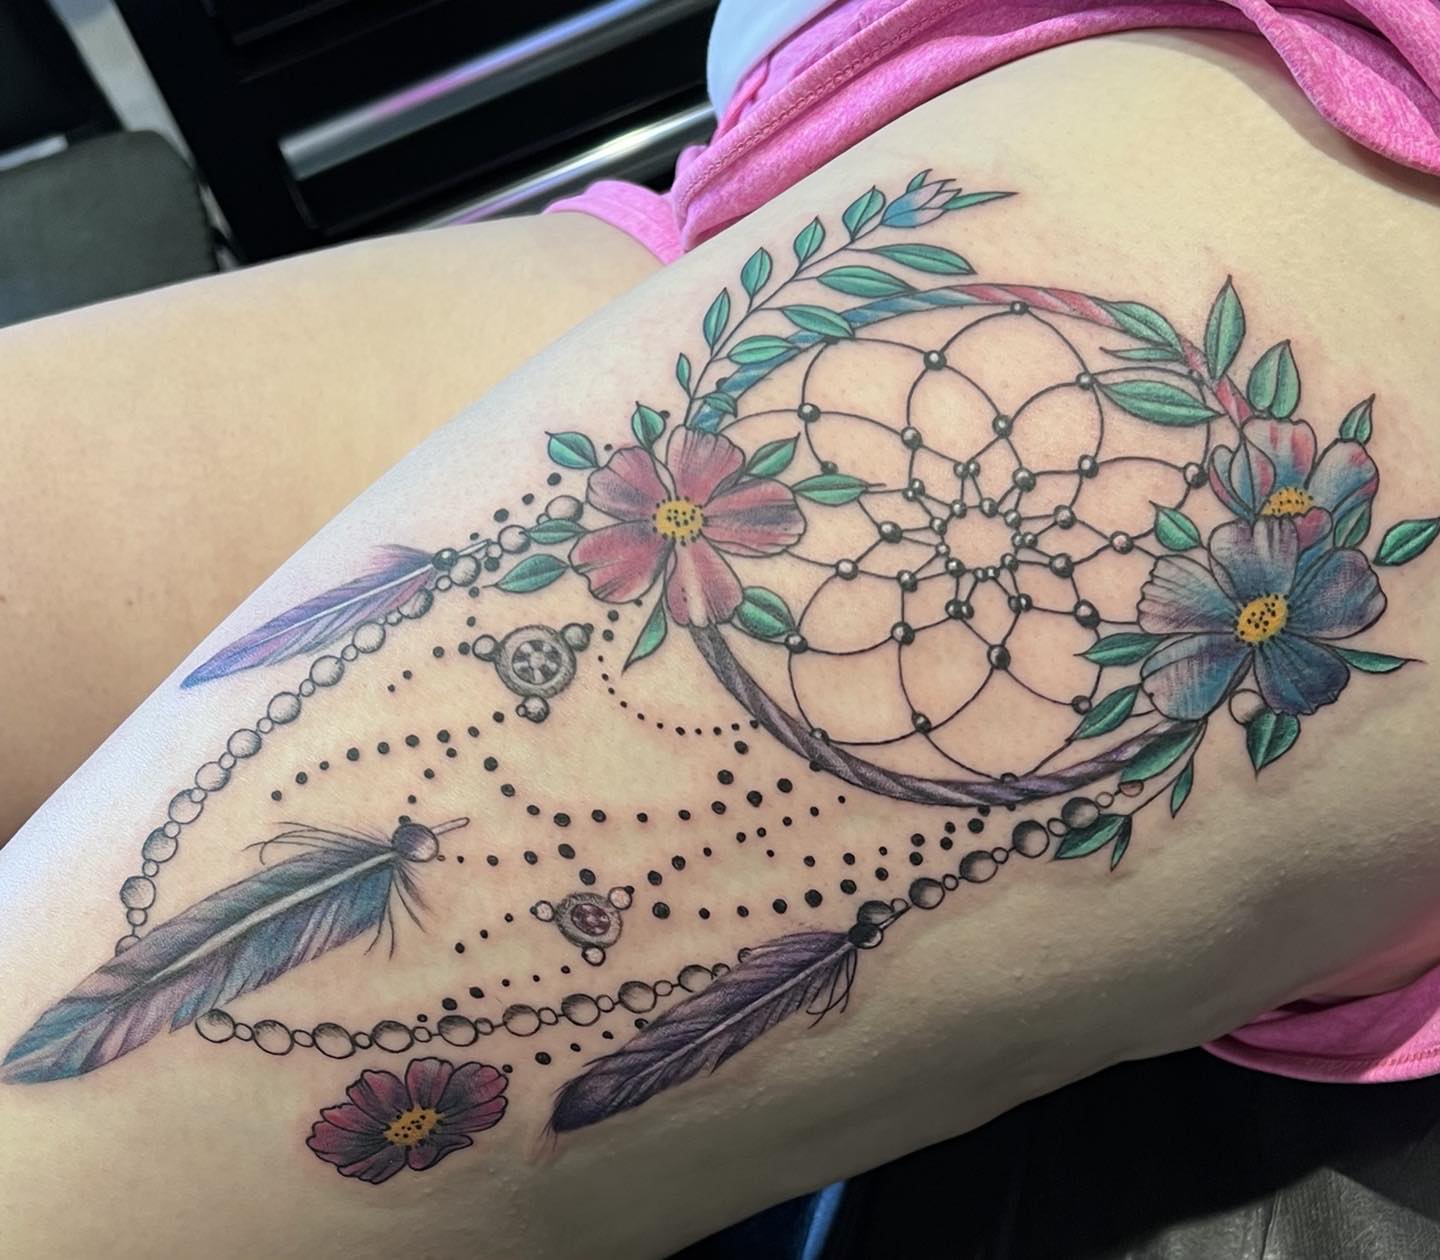 If you are into flowers and cannot imagine a tattoo design without them, then this tattoo idea is for you! Let's match the beauty of flowers with a dream catcher, which represents hope for the future.